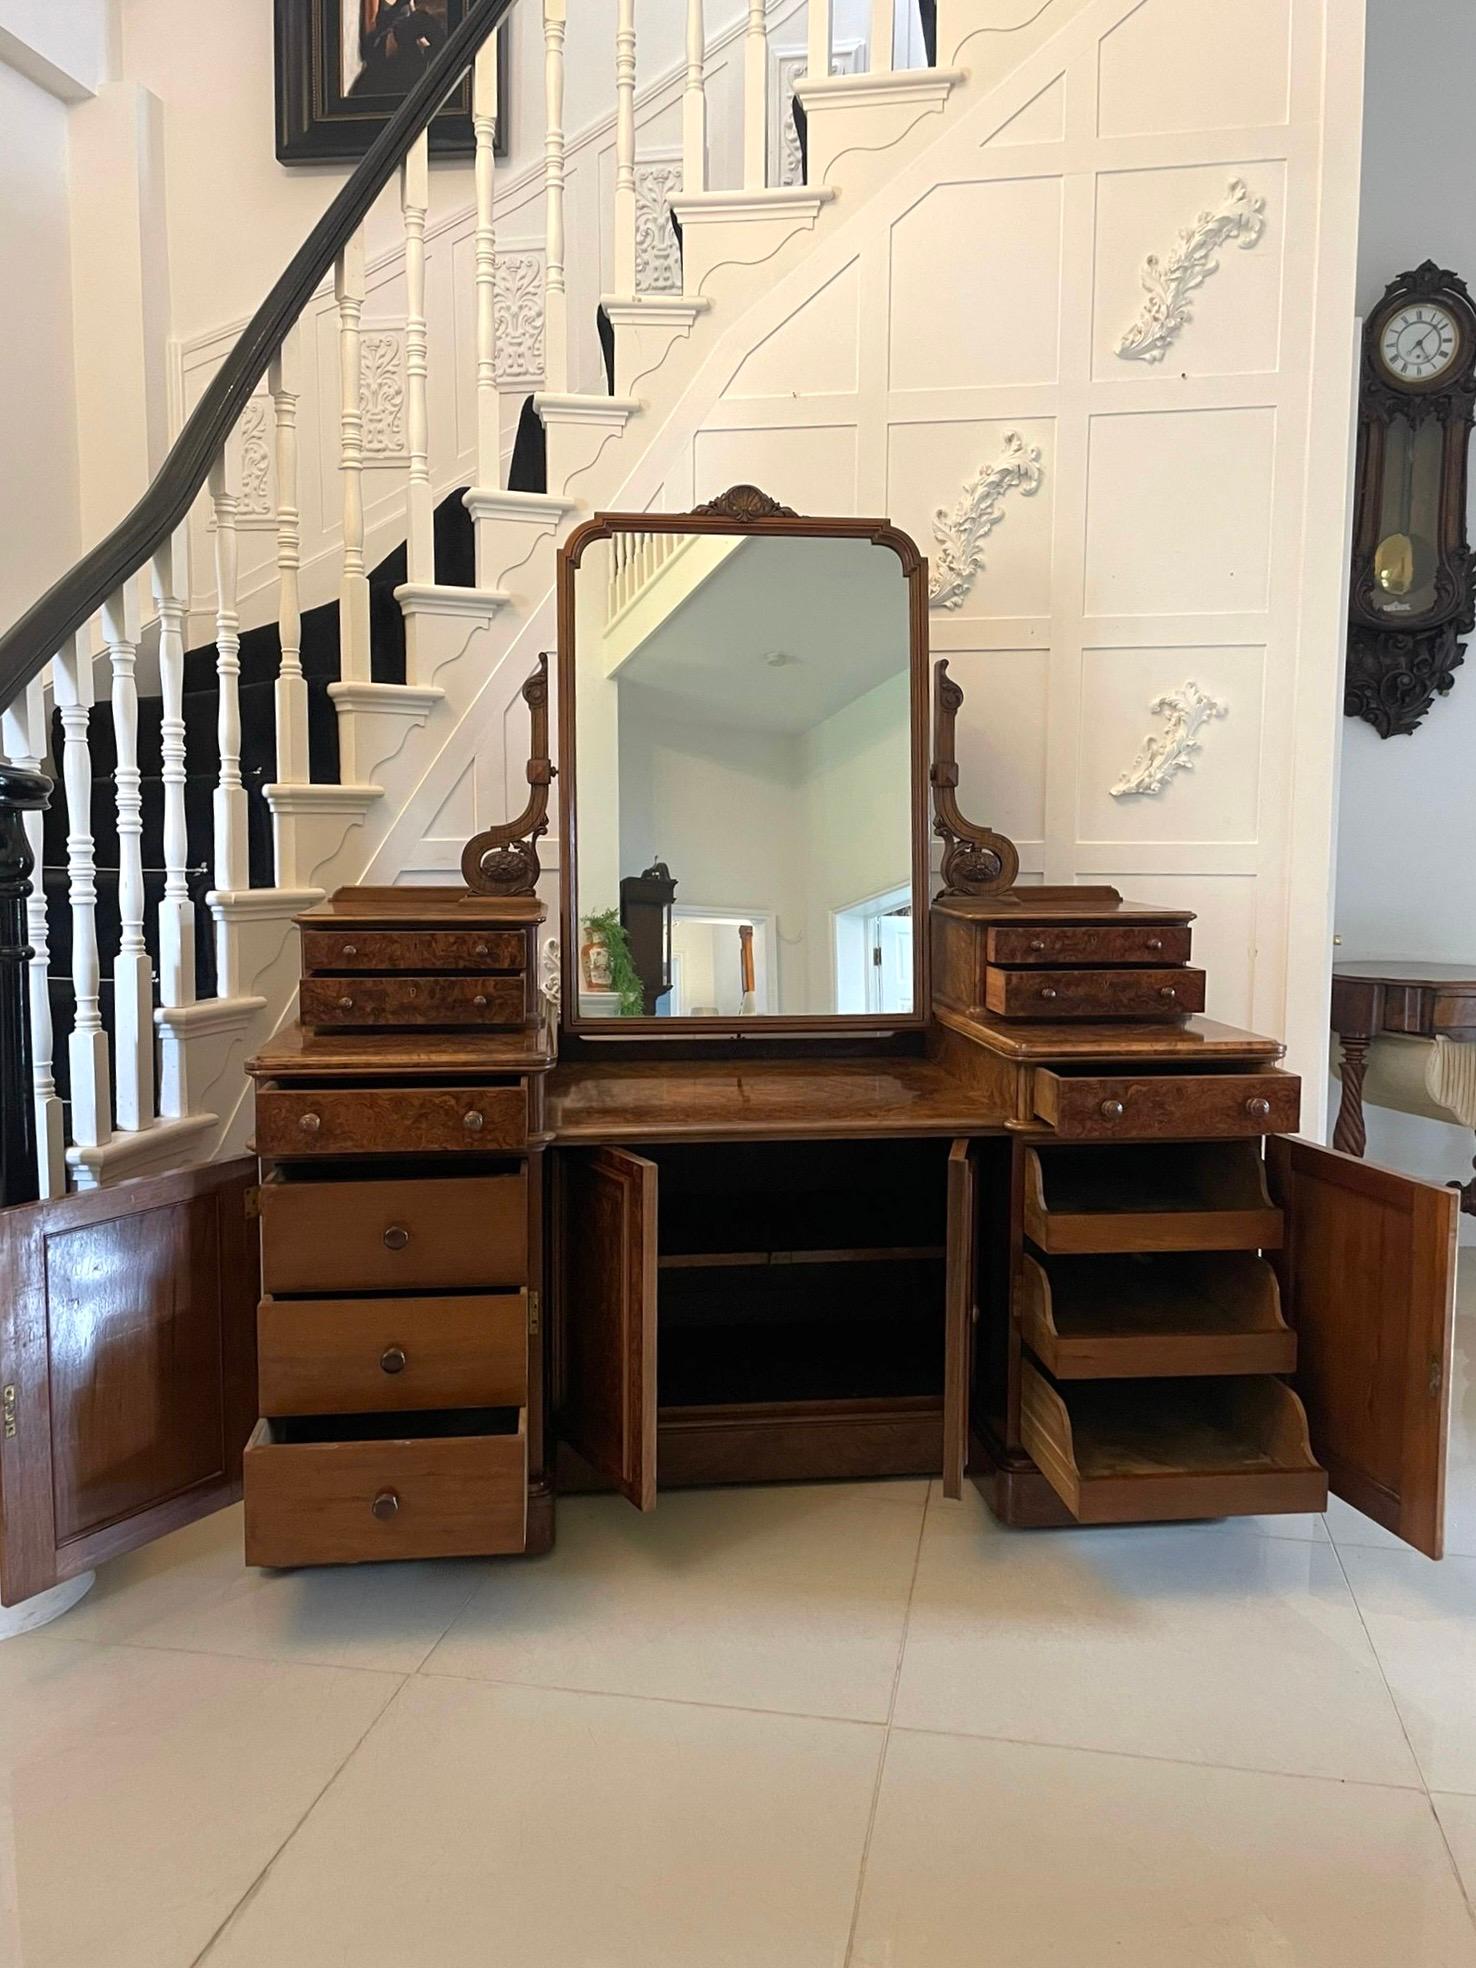 Exhibition quality antique Victorian burr walnut dressing table having a large adjustable mirror in a carved walnut frame supported by carved walnut scroll supports above four exhibition quality burr walnut small drawers with original turned walnut